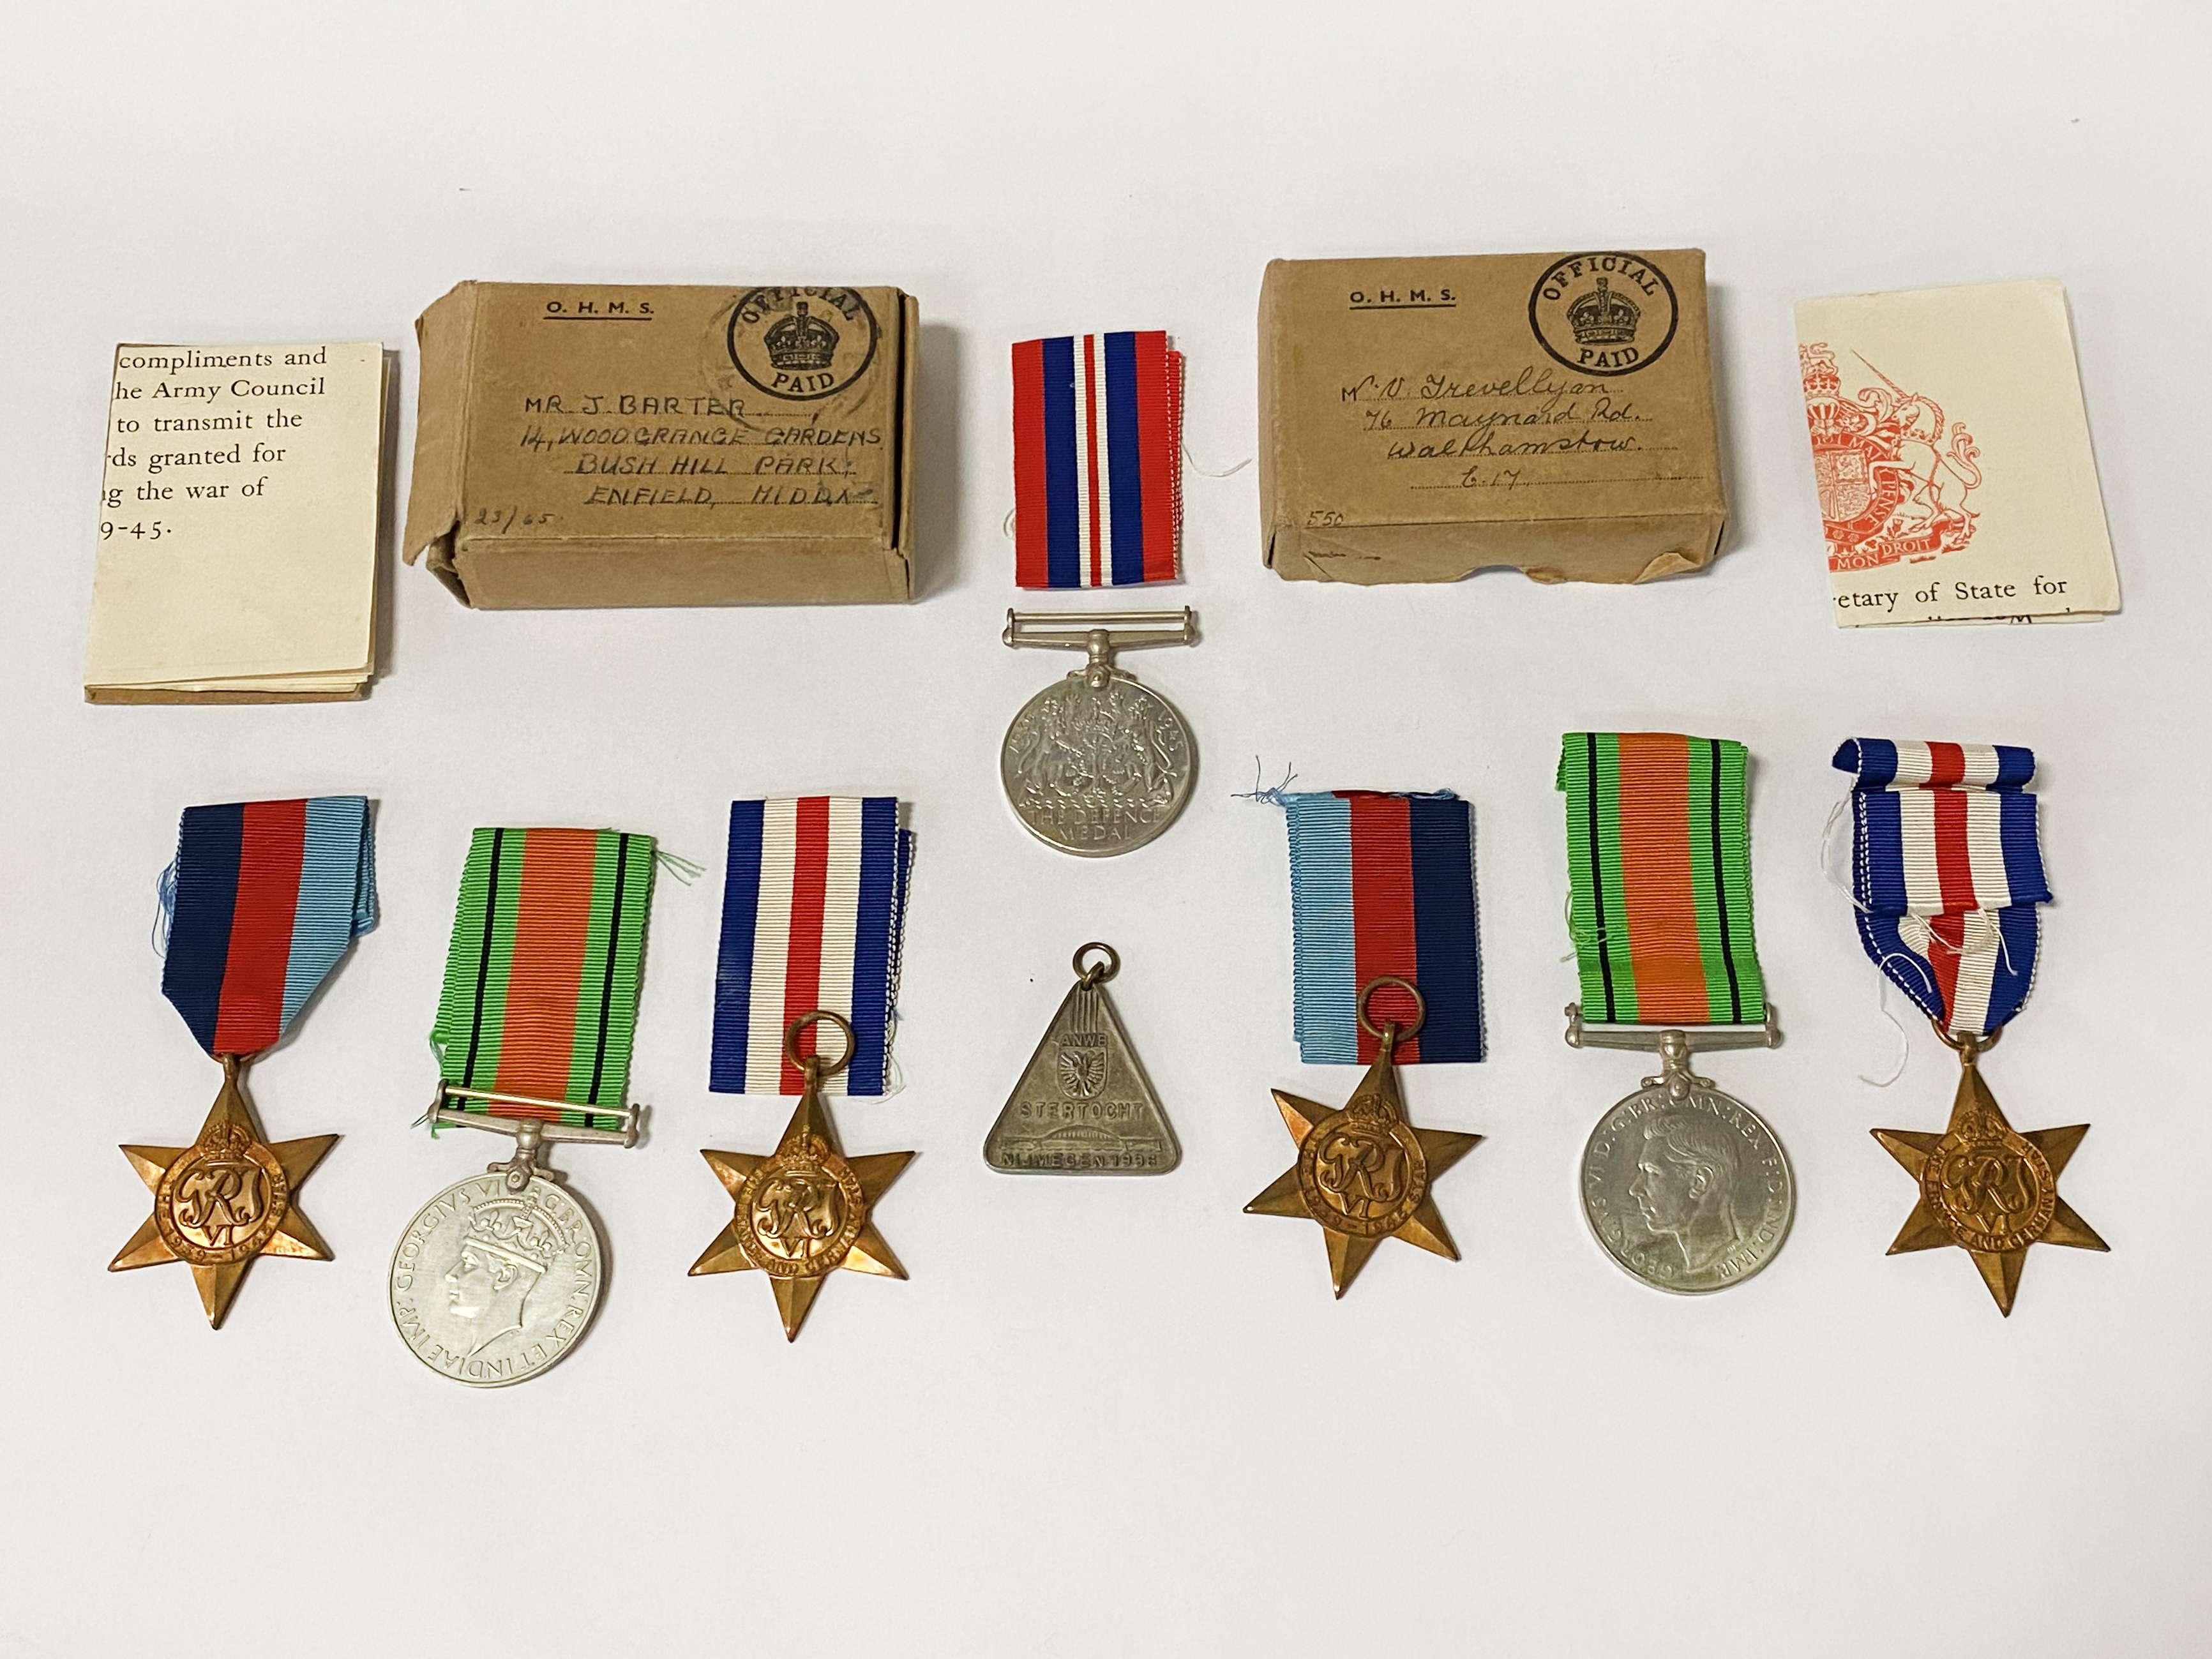 2 SETS OF CAMPAIGN MEDALS